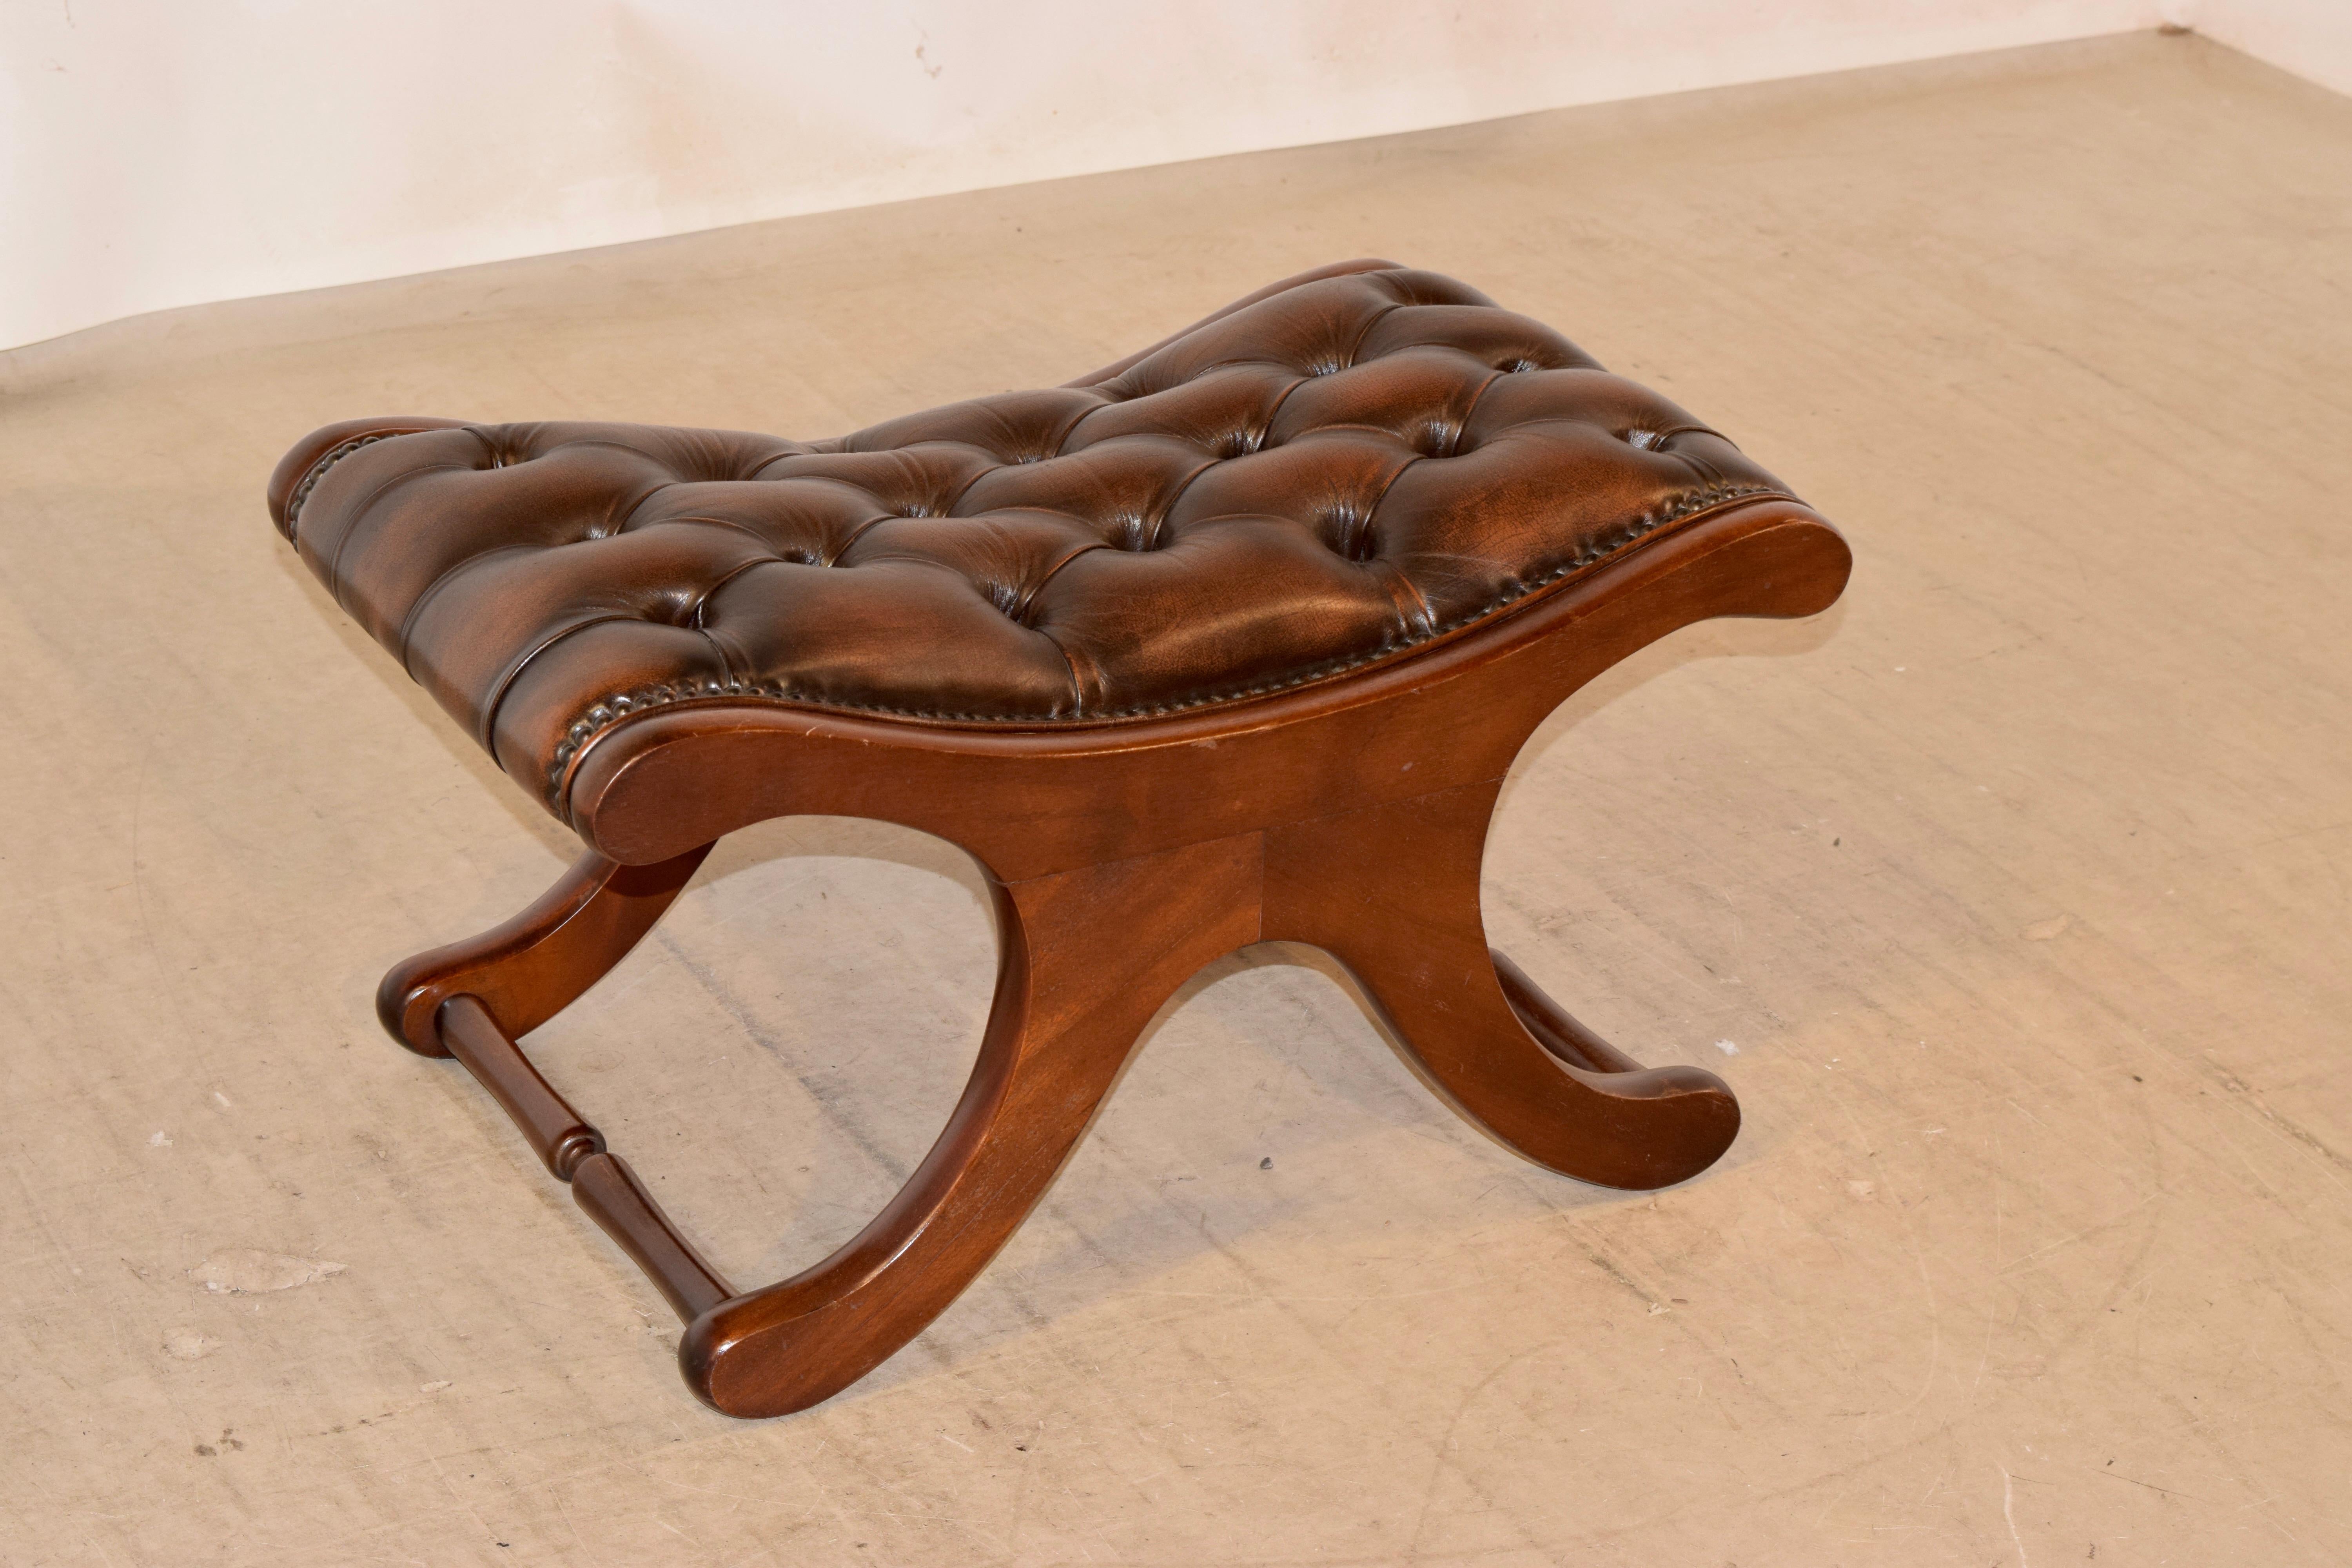 English mahogany stool with a Chesterfield upholstered leather top in rich brown with leather welt decoration, circa 1920.
      